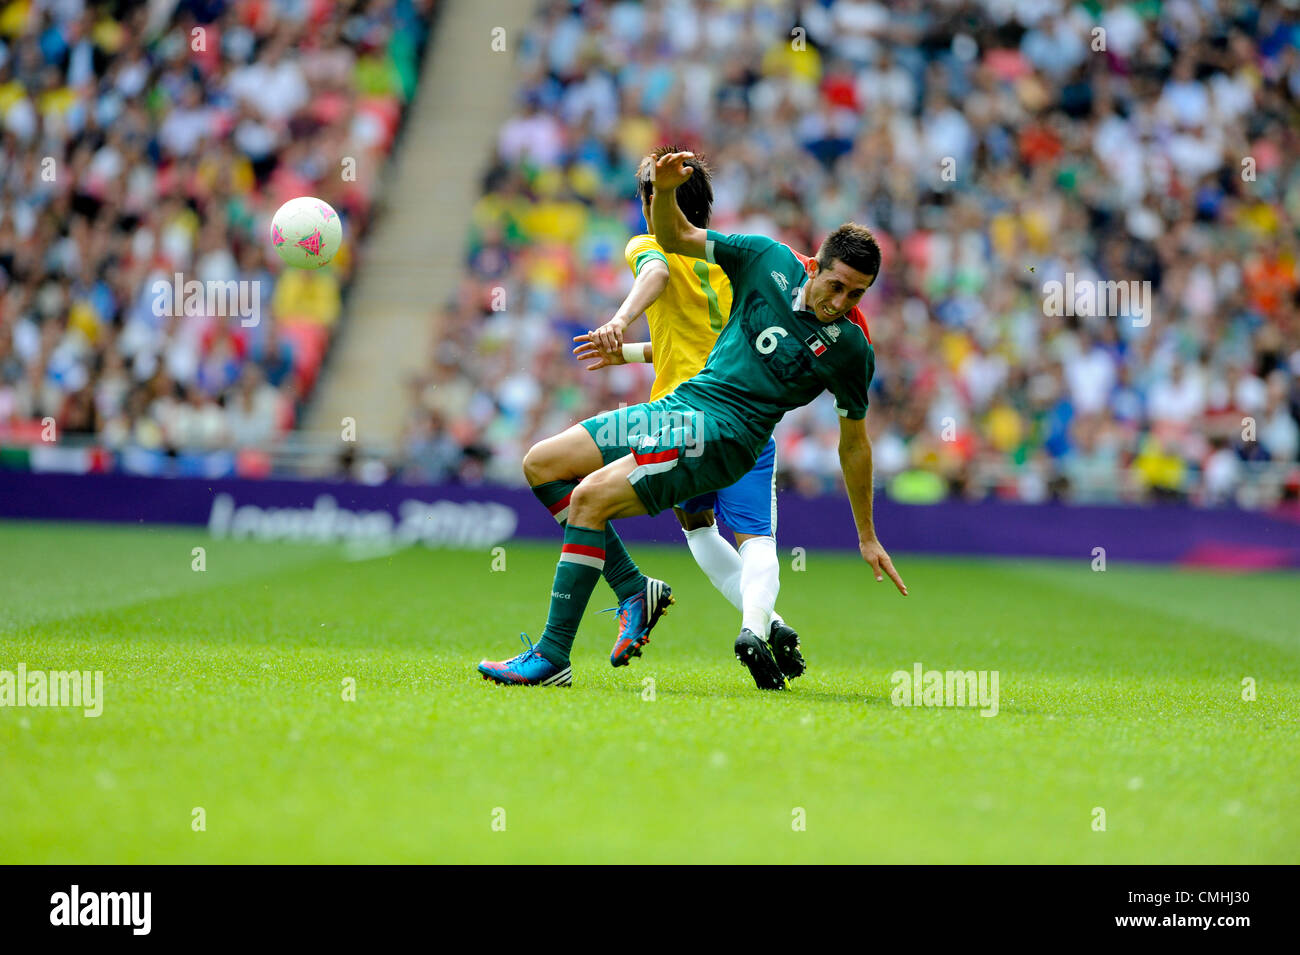 11.08.2012 London, England. Mexico's Hector Herrera (Midfield) is hustled off the ball by Neymar during the Olympic Men's Final  between Brazil  and Mexico from Wembley Stadium. Stock Photo